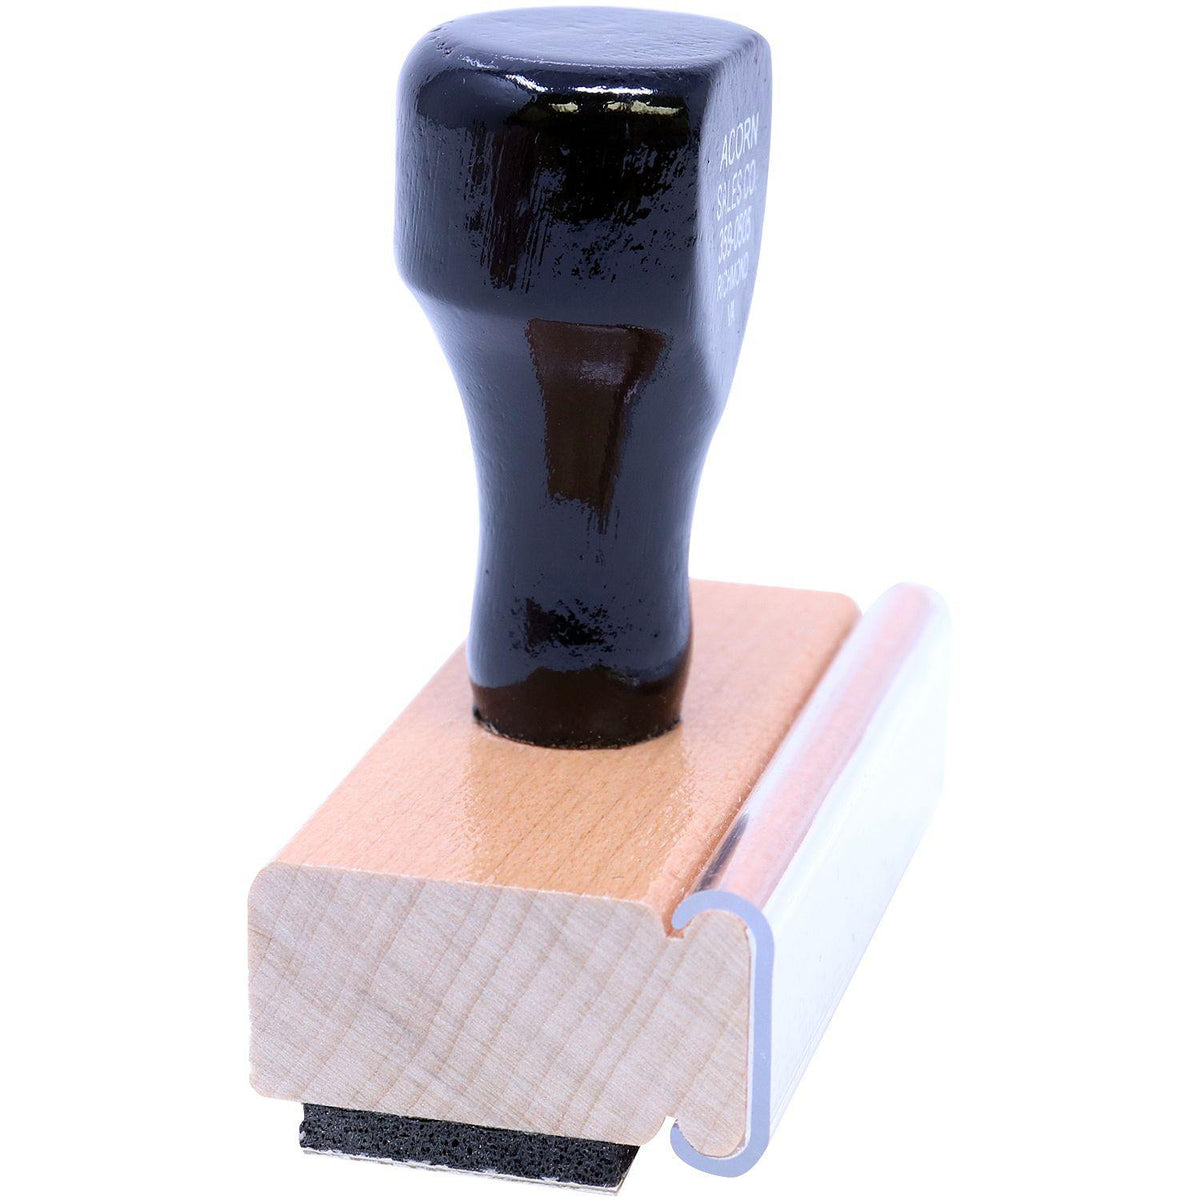 Side View of Two Thumbs Up with Thumb Icon Rubber Stamp at an Angle